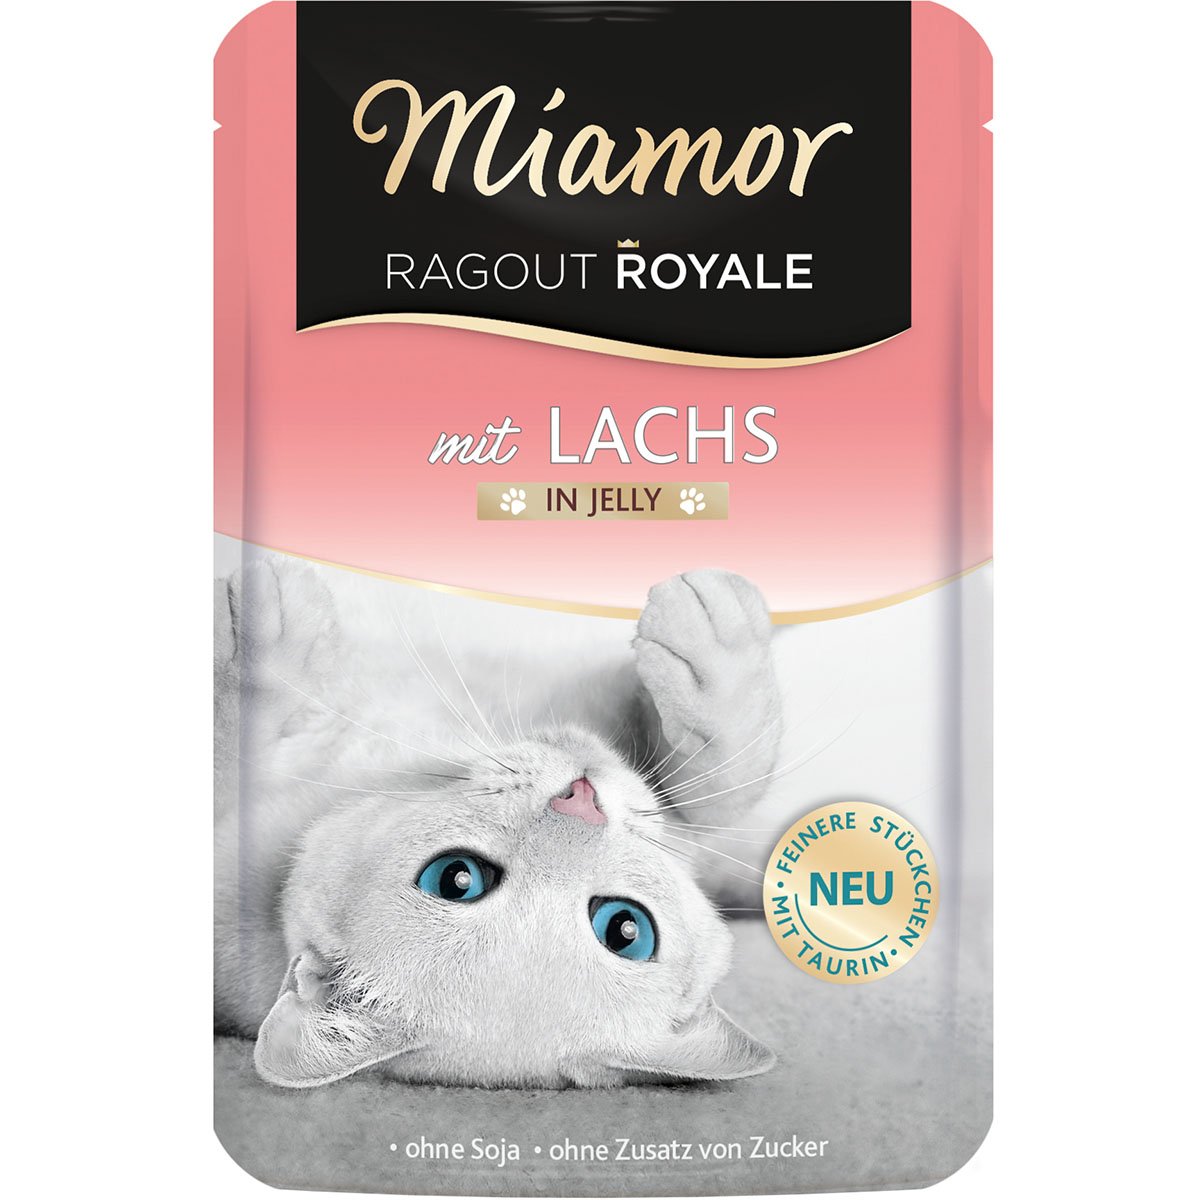 Miamor Ragout Royale Lachs in Jelly 22x100g